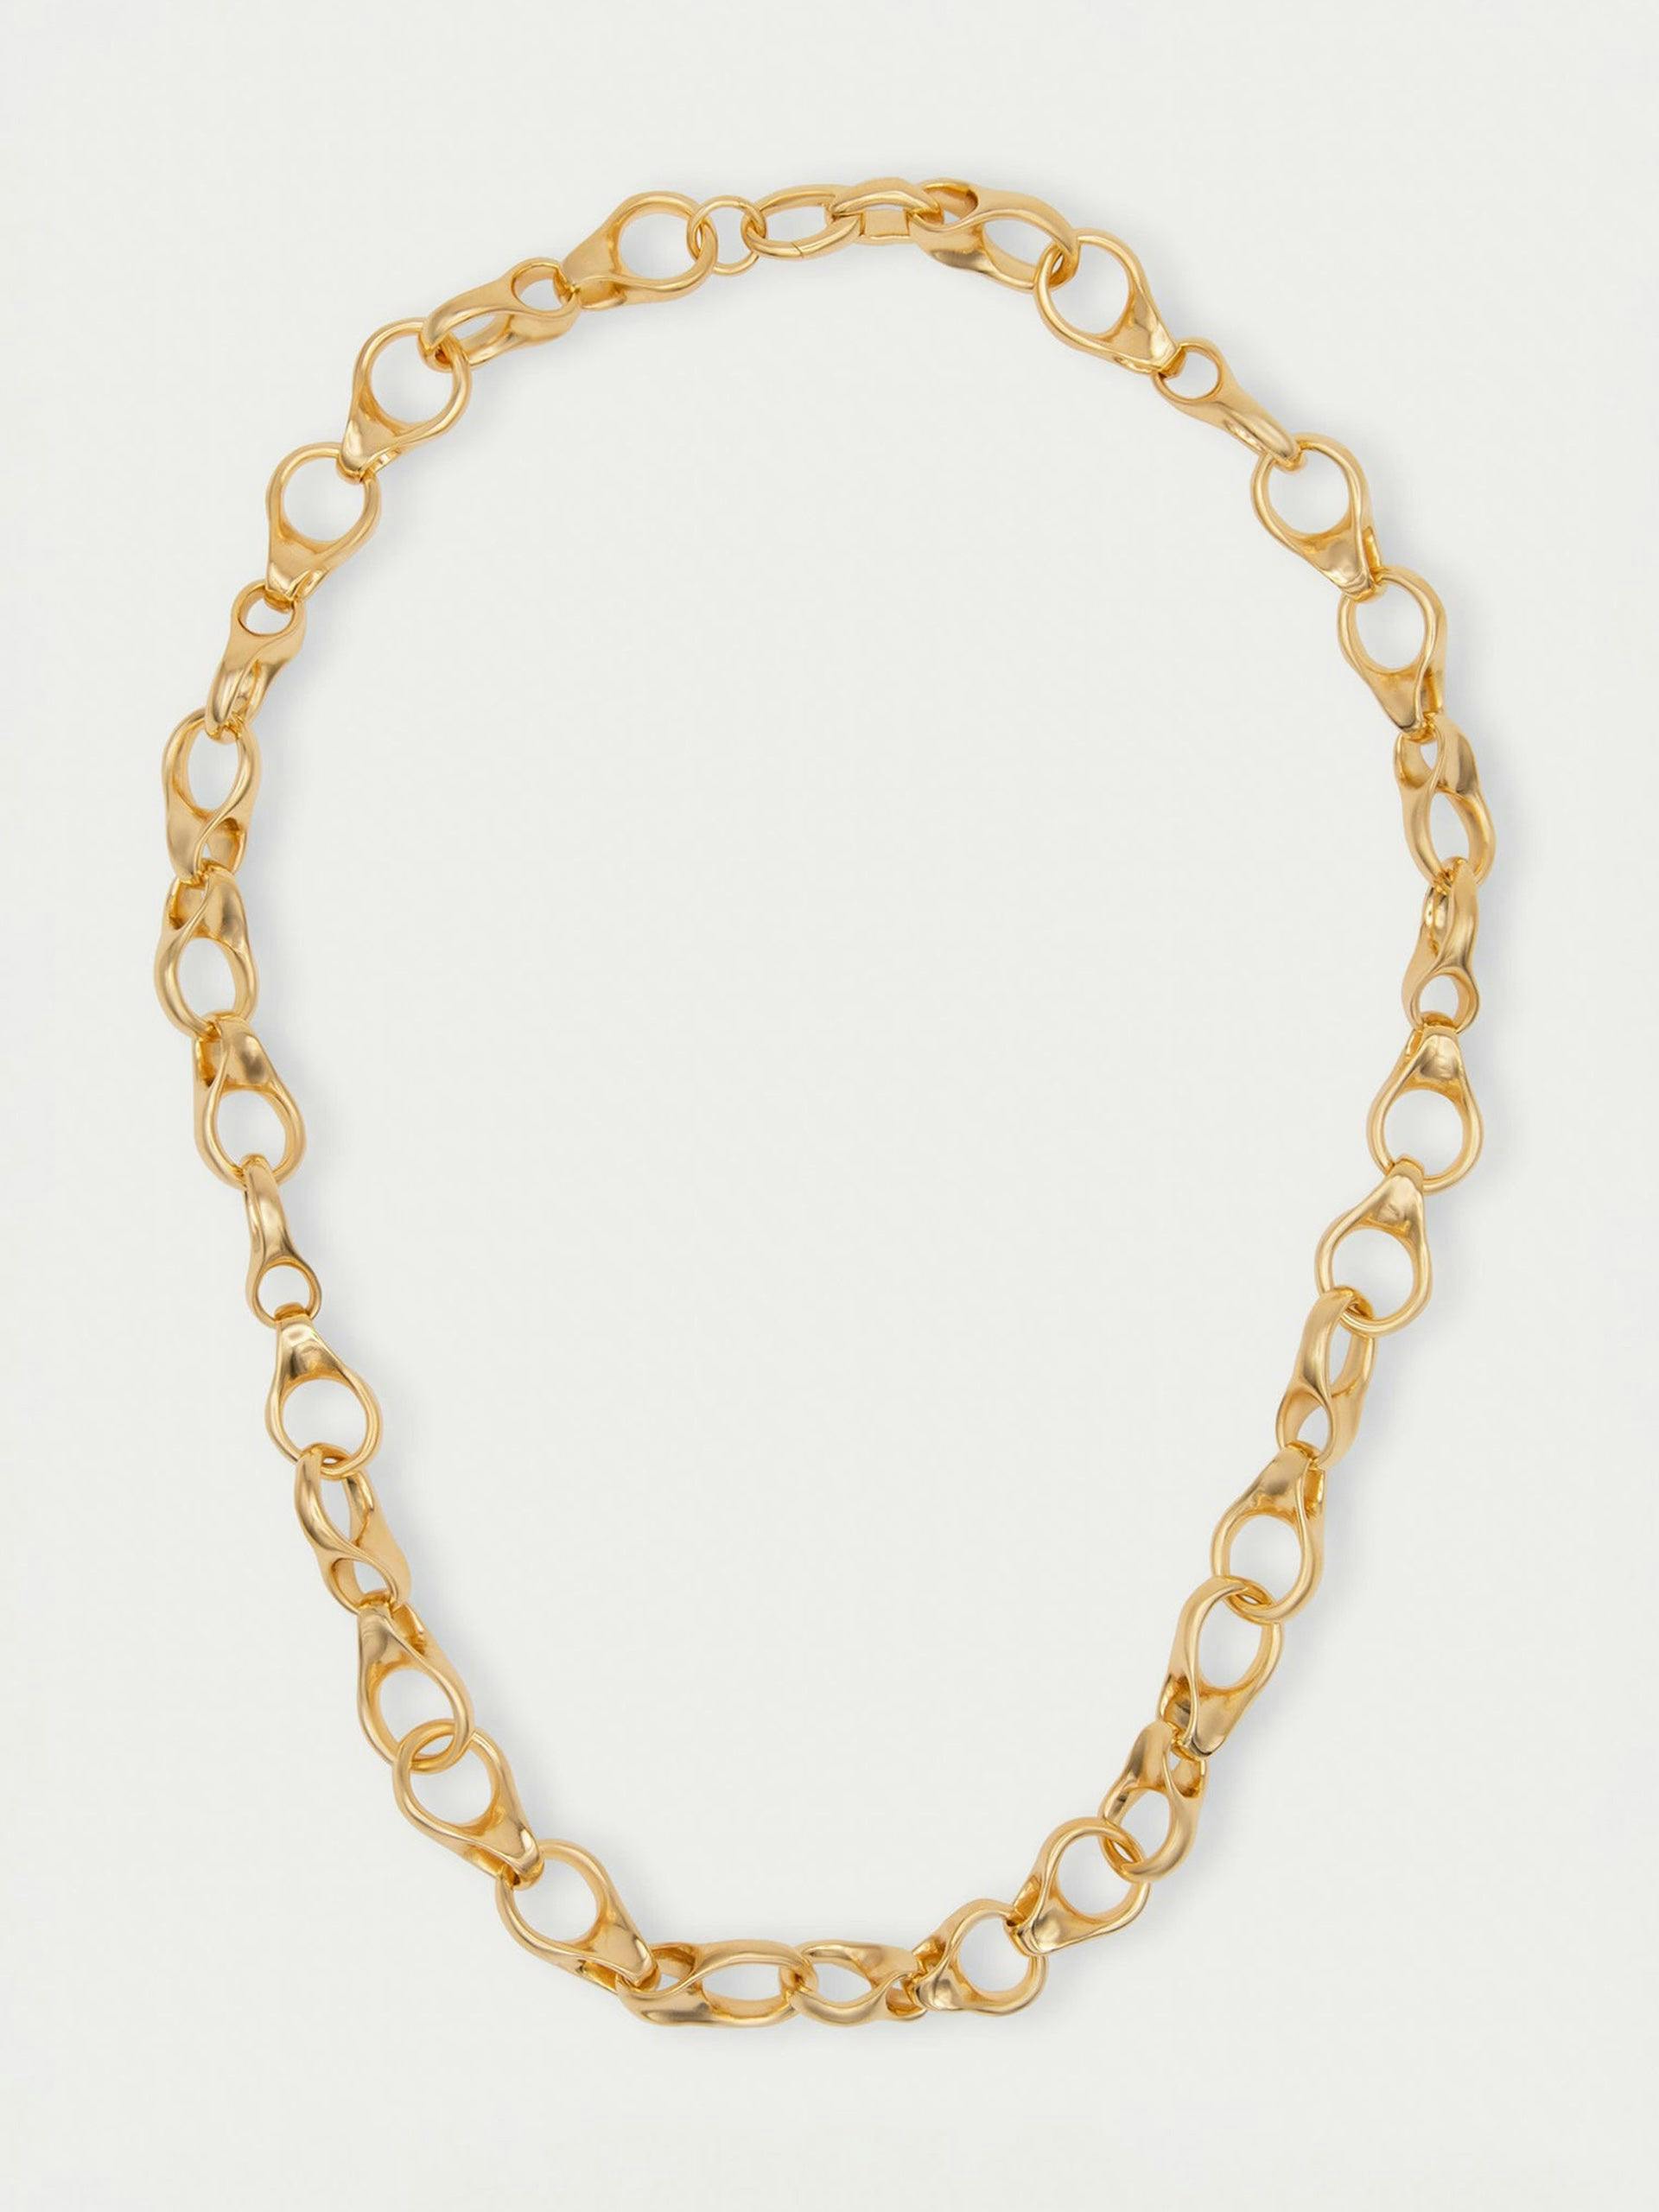 The Infinitum necklace